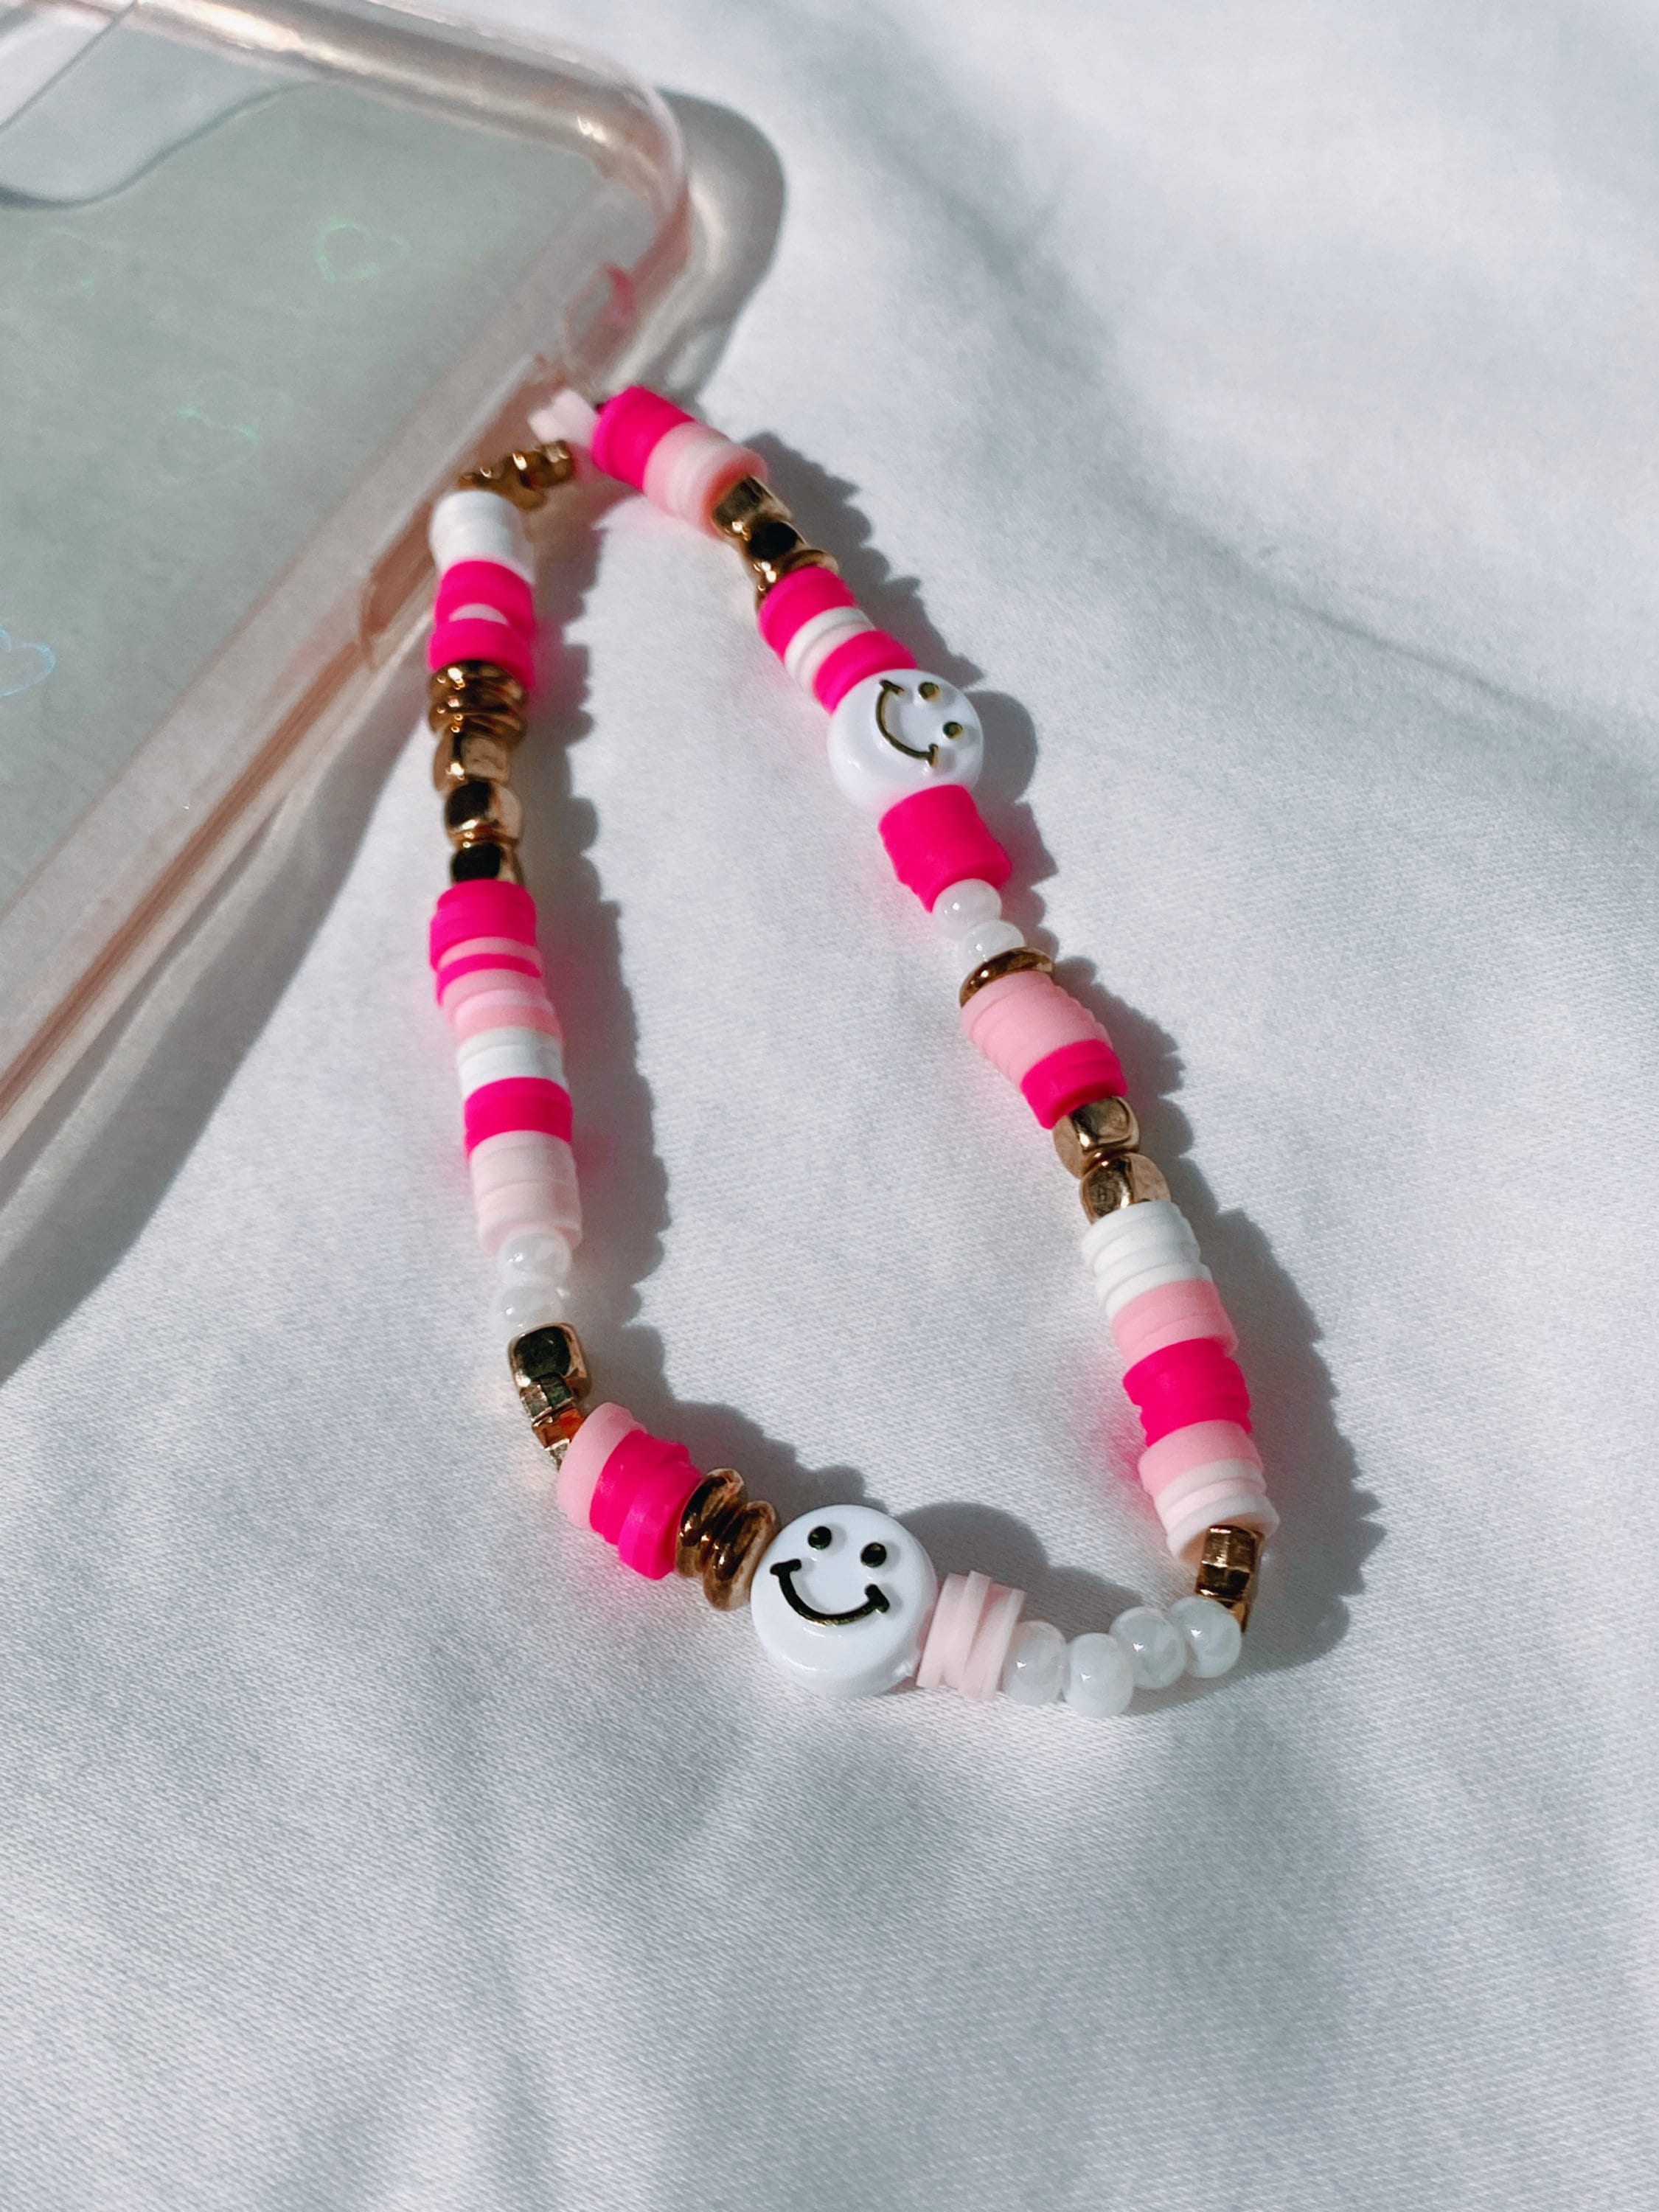 Typo - Create your own bracelet, keyring or phone charm! ✨🦋☮️ ​ ​What will  you be making first? ​ ​The DIY Charm Kits comes with: 50cm Clear beading  elastic, 75cm Black beading